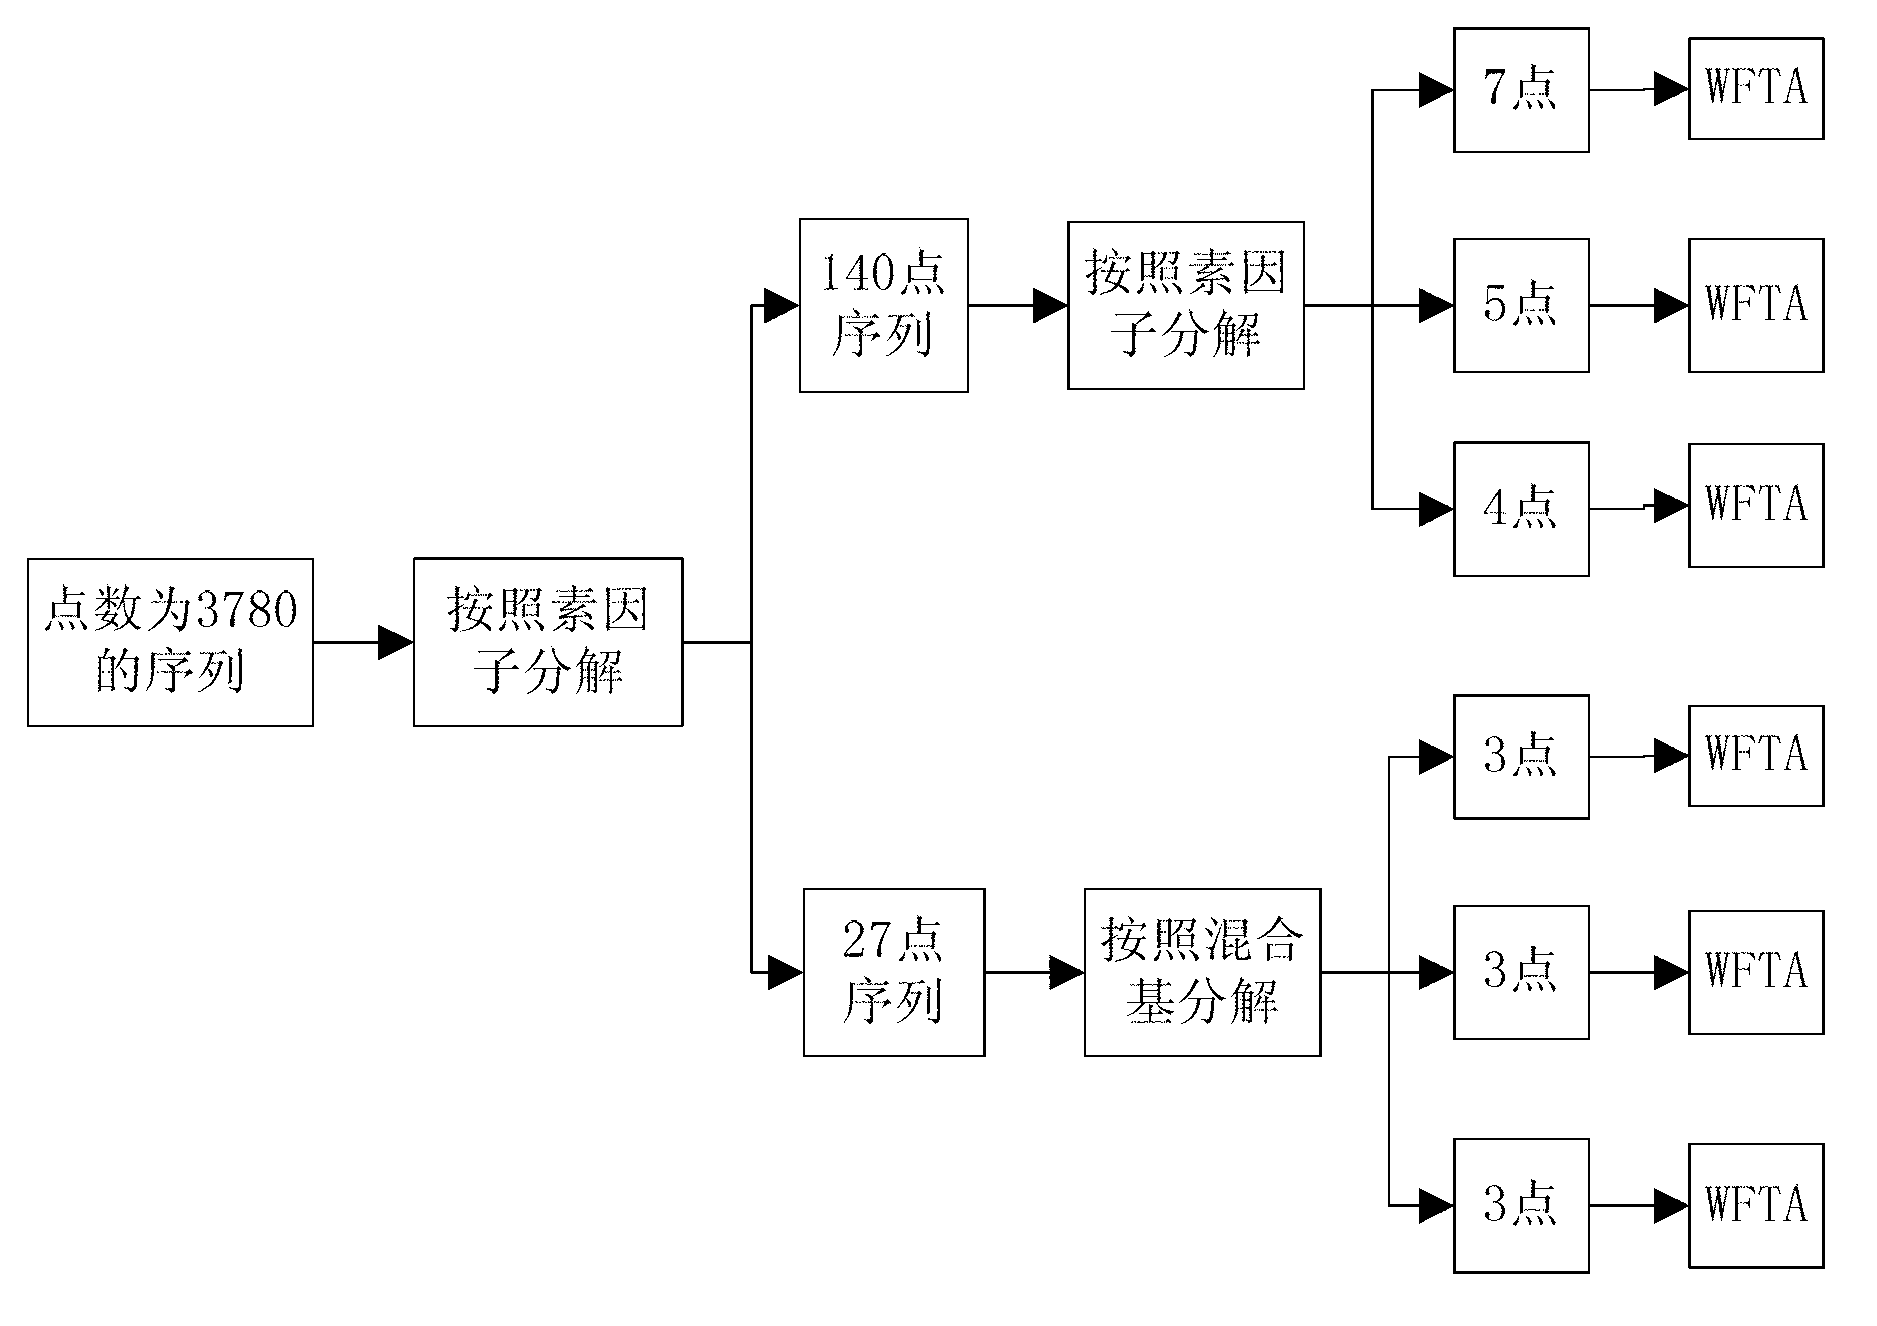 Realization method for fast computation of discrete Fourier transform with non-second power points